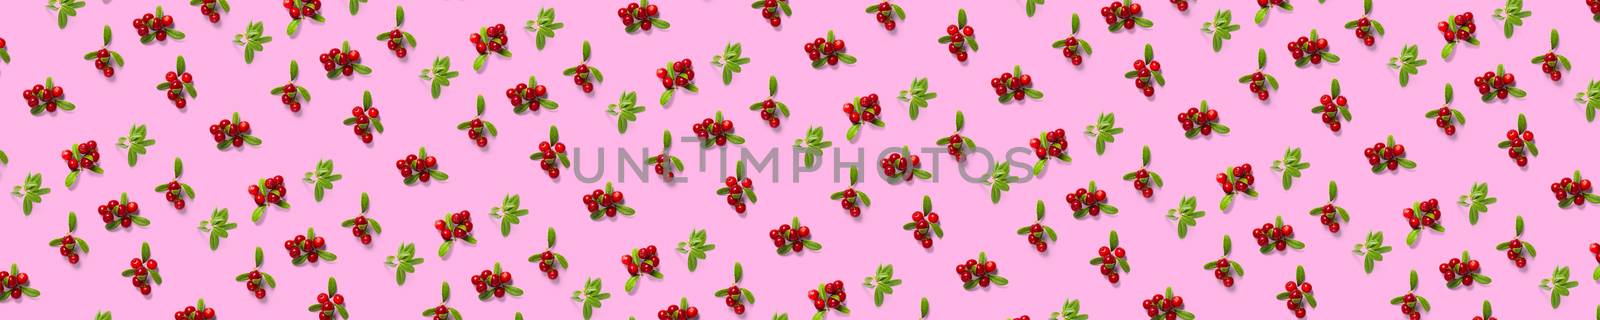 Lingonberry background on pink backdrop. Fresh cowberries or cranberries with leaves as autumn or christmas background